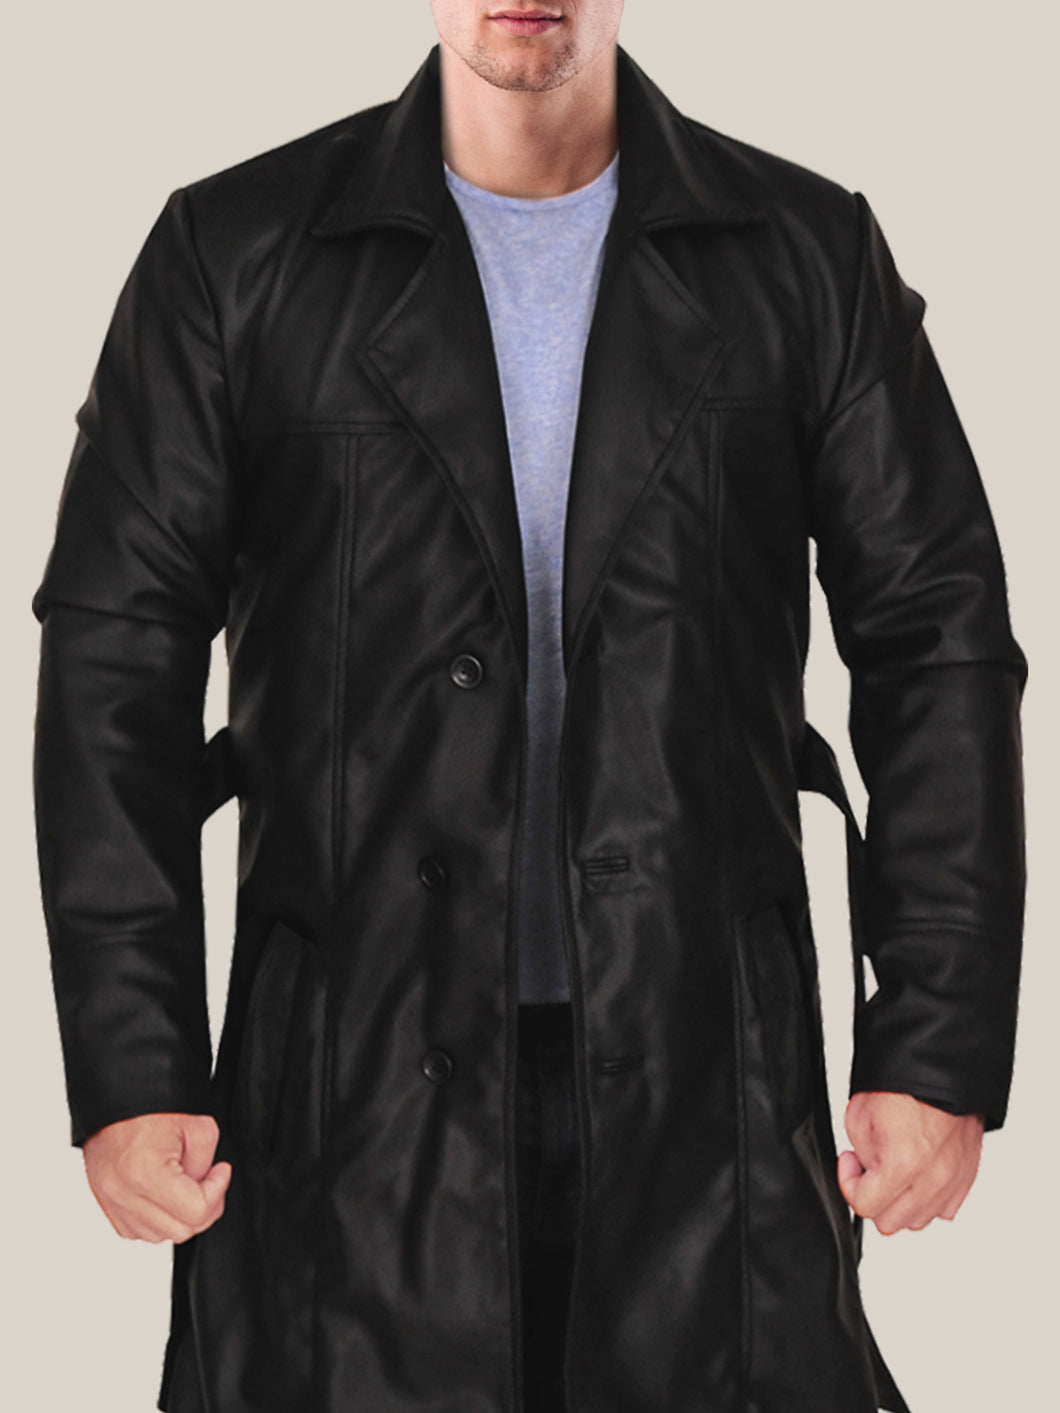 Men's Jazzy Belted Black Leather Trench Coat